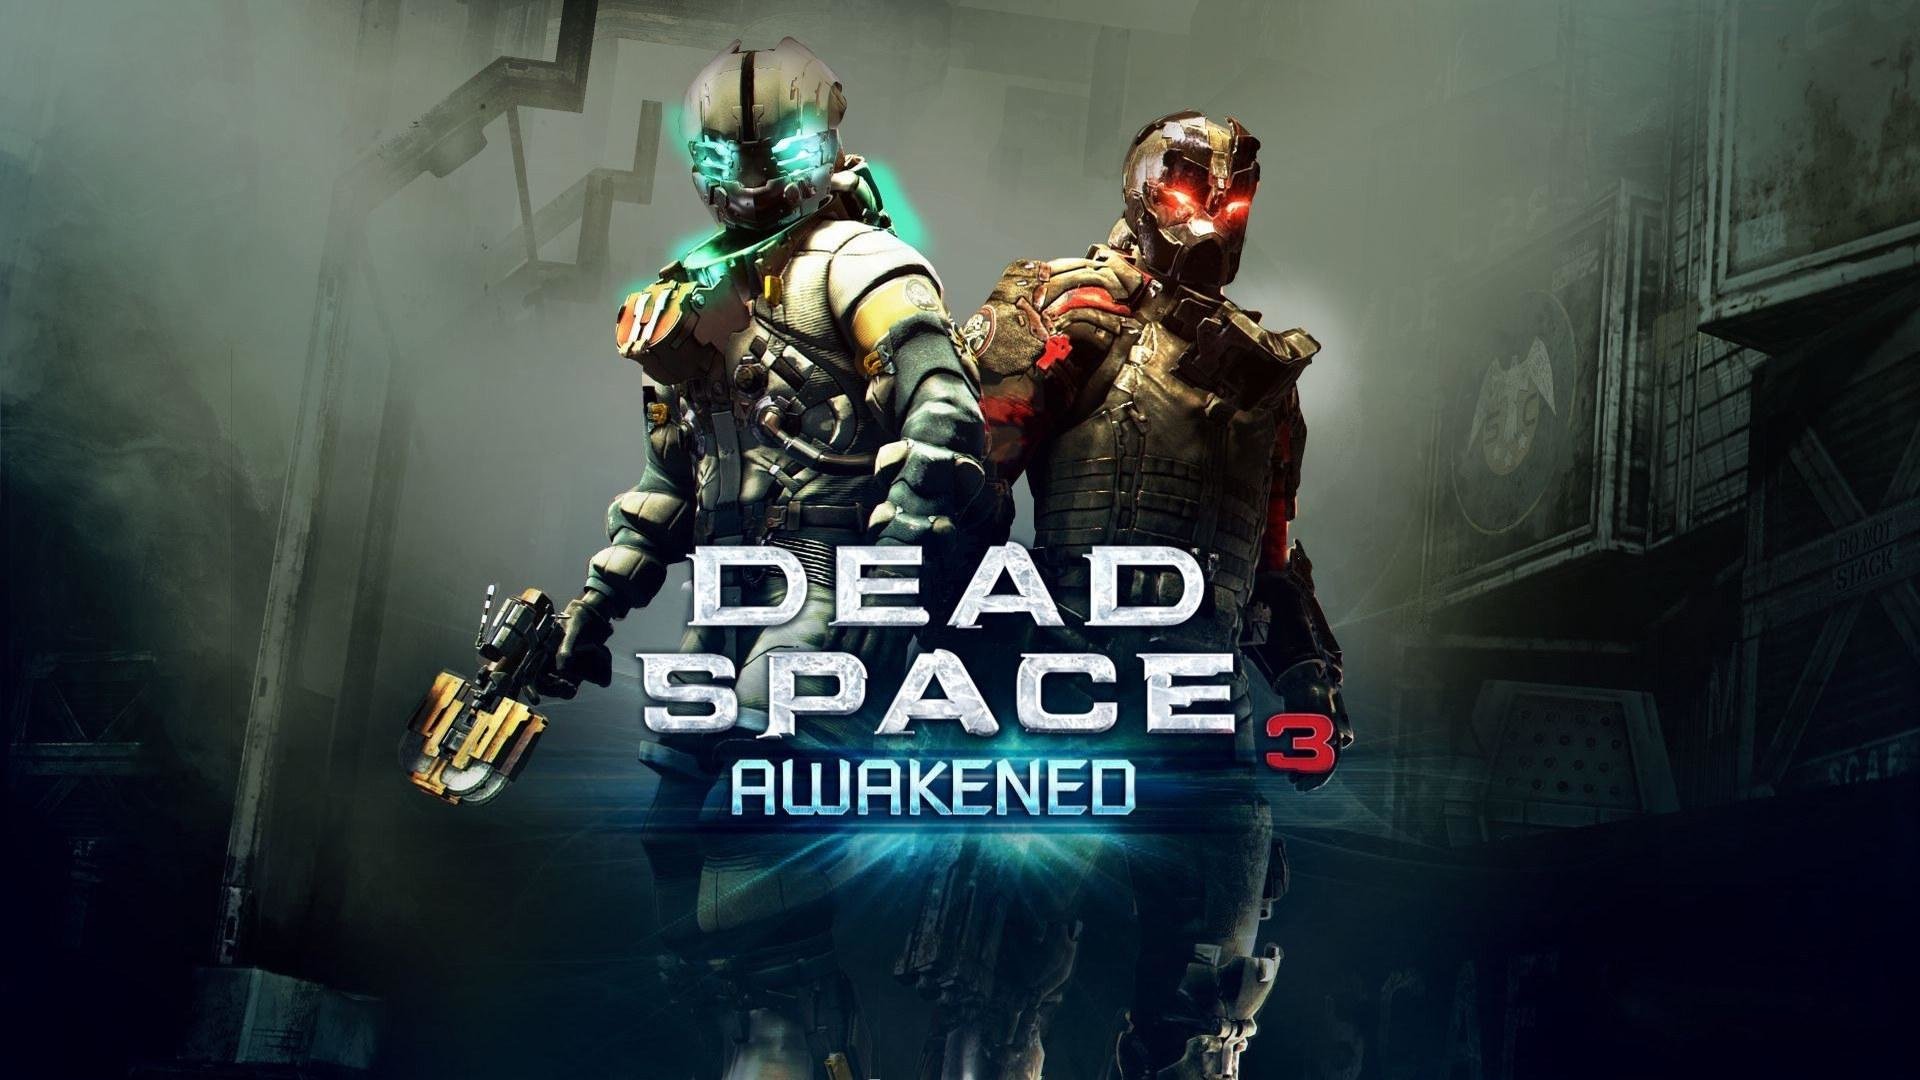 Download full hd 1920x1080 Dead Space 3 PC wallpaper ID:208960 for free